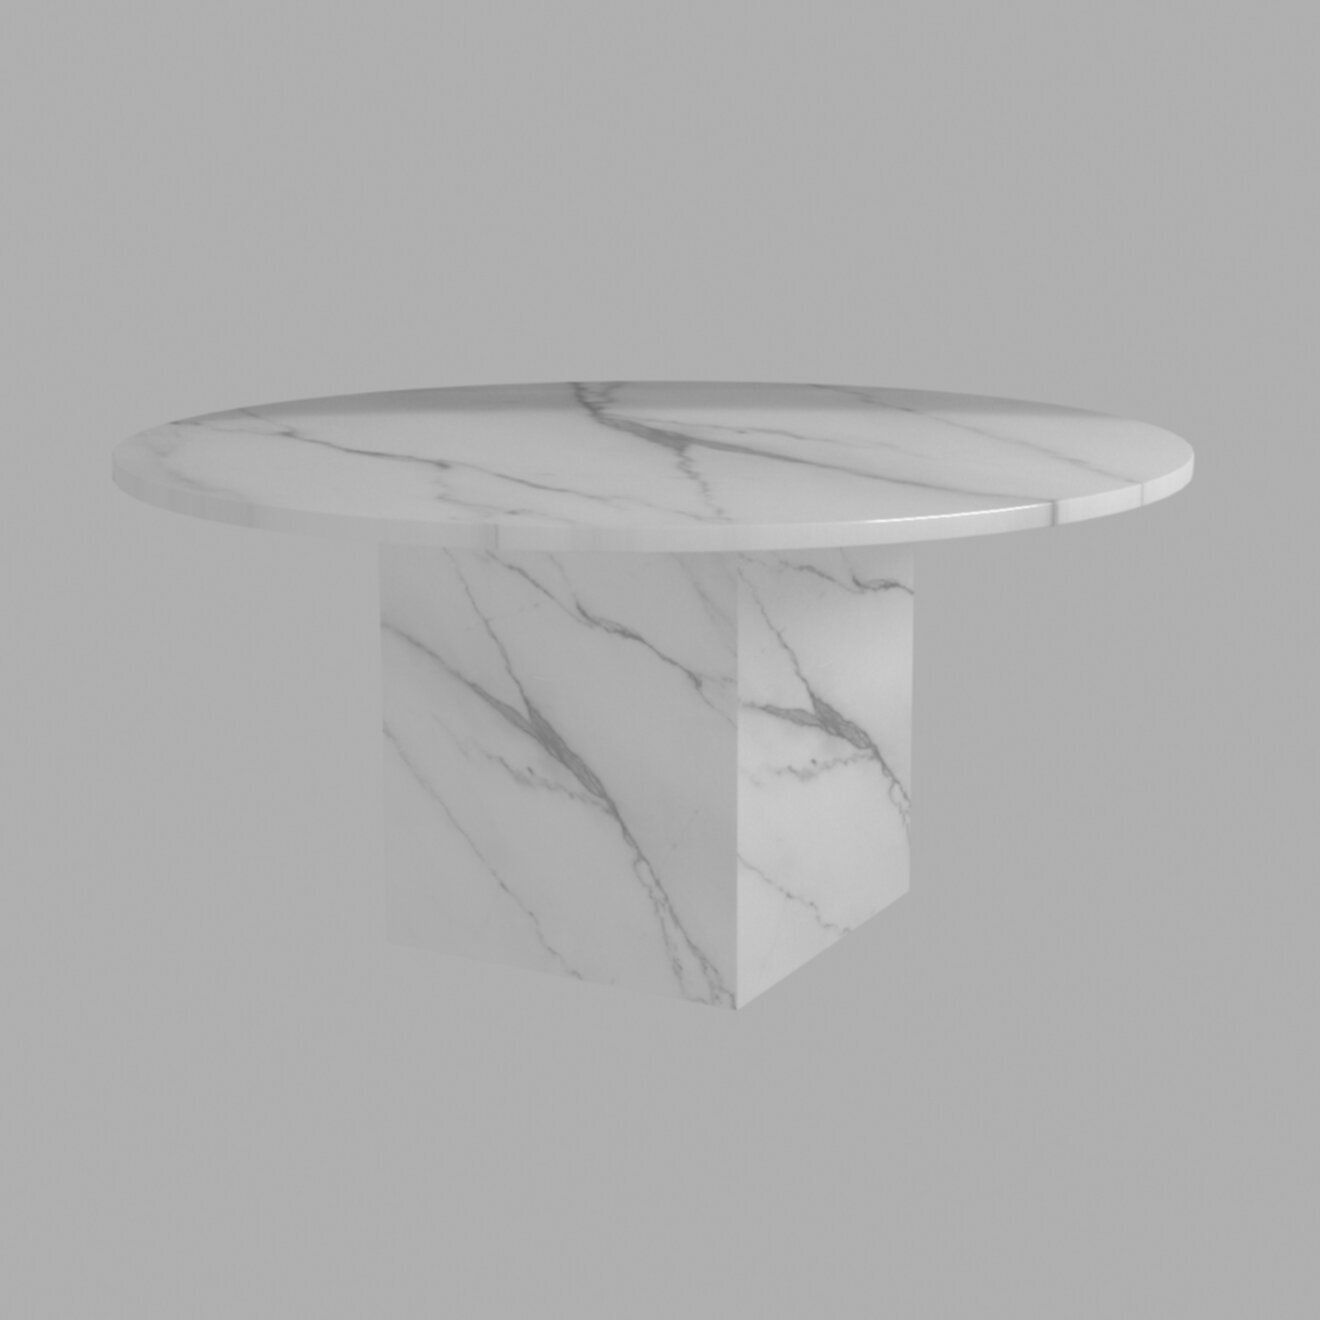 Round dining table for 8 made of beautiful marble 